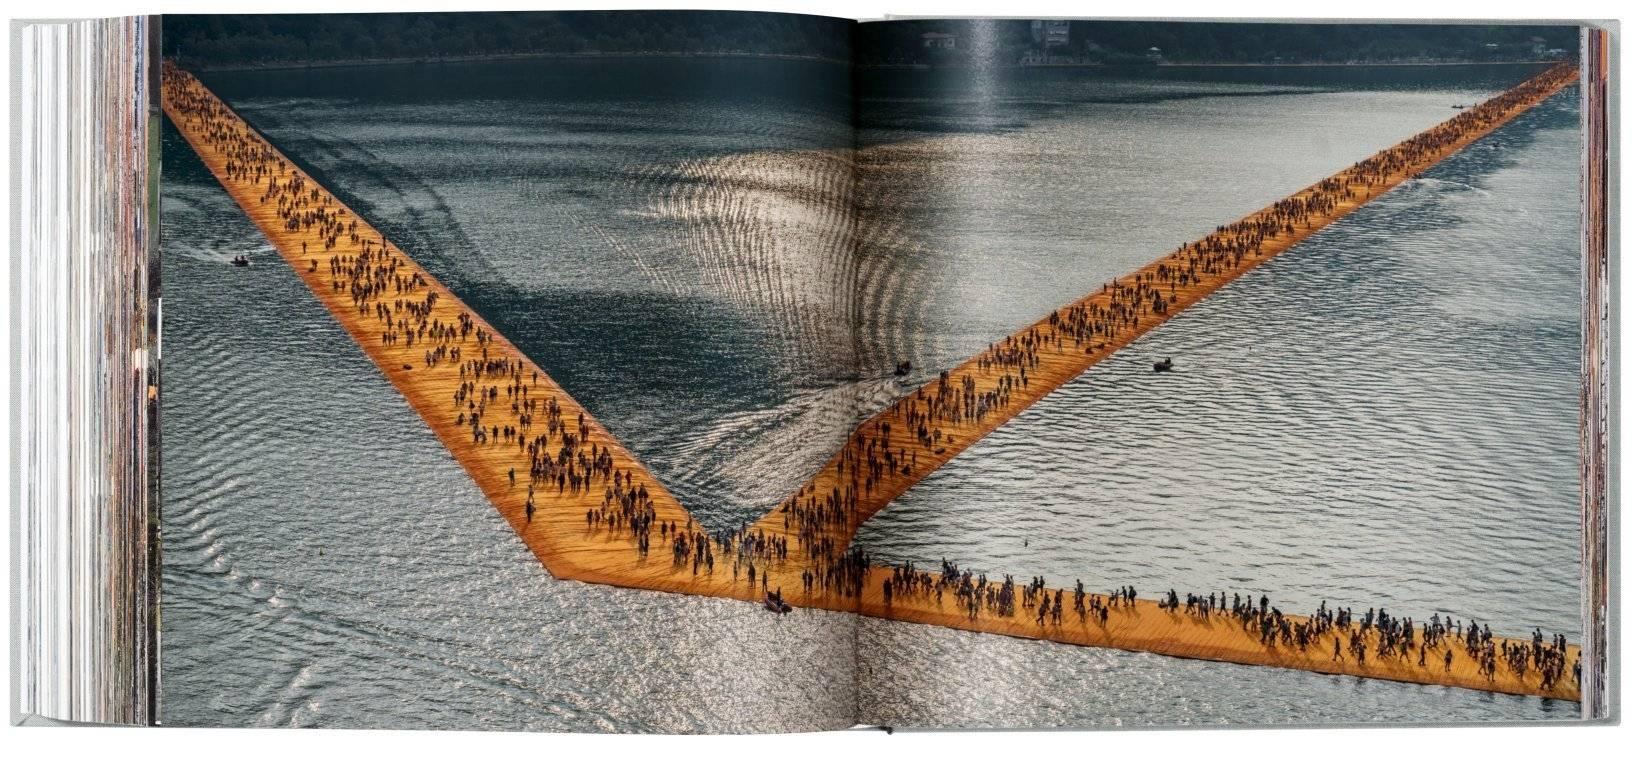 Christo and Jeanne-Claude, the Floating Piers 1